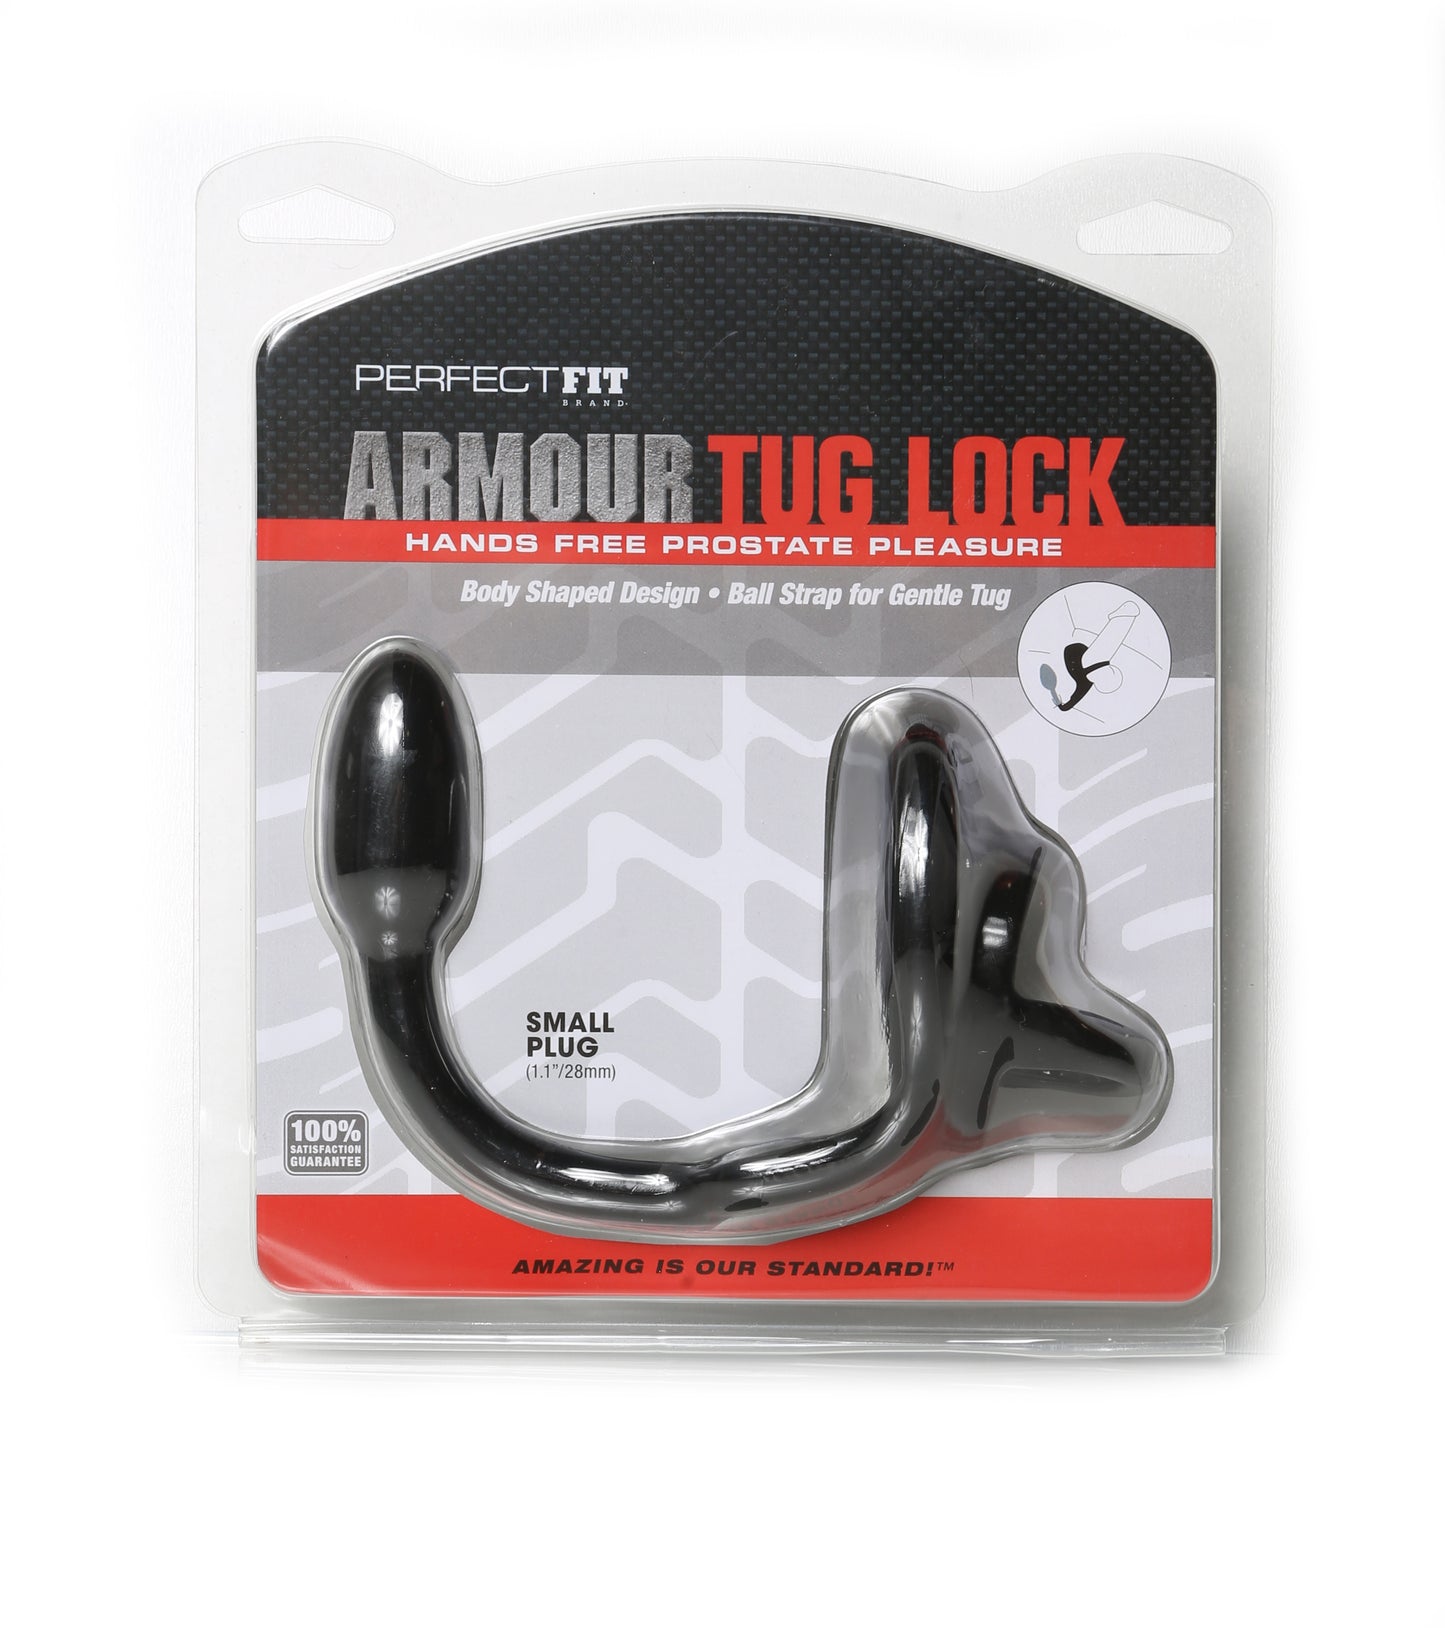 Armour Tug Lock Small - Just for you desires